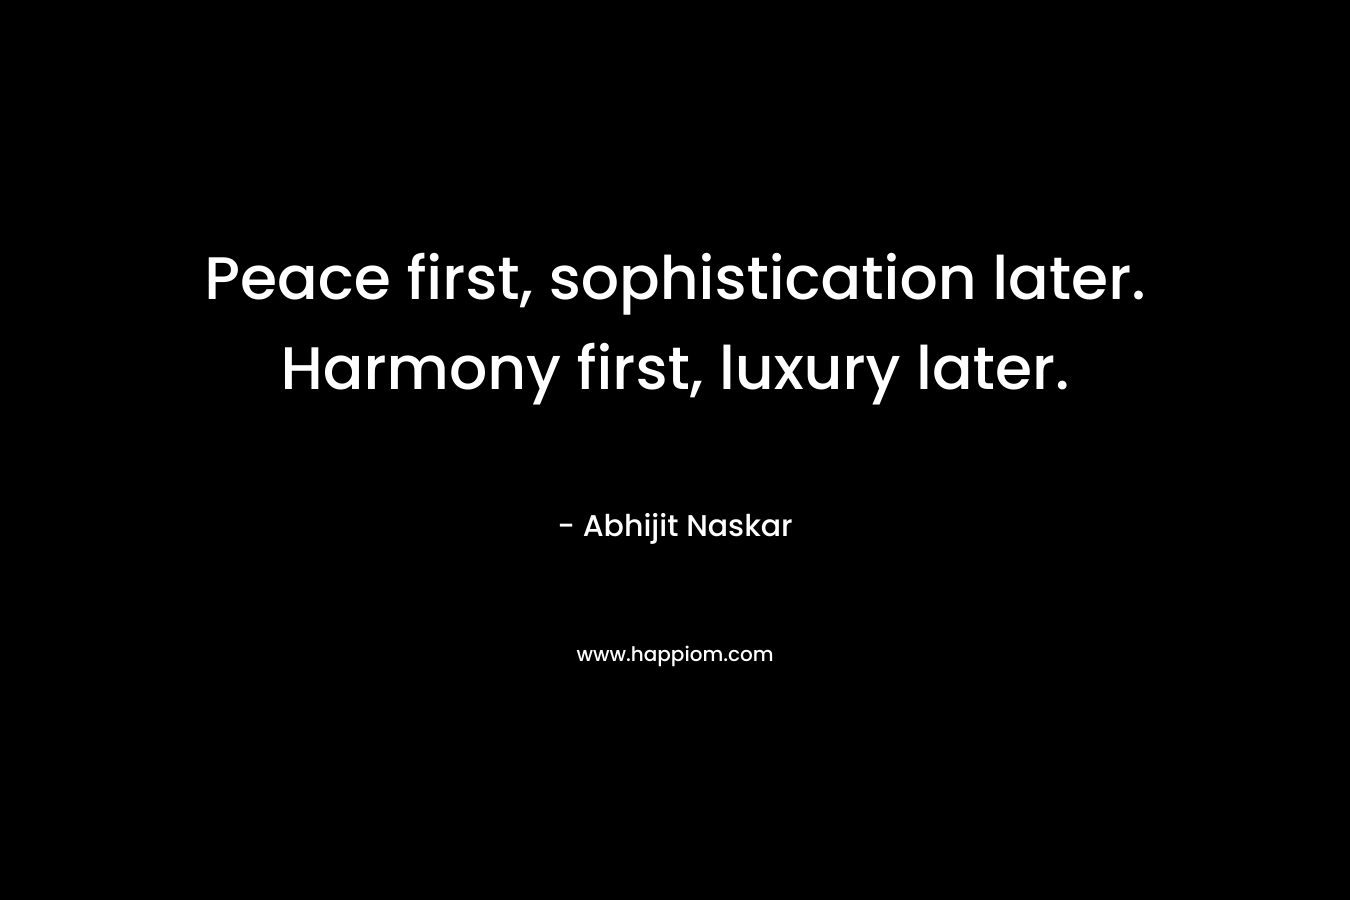 Peace first, sophistication later. Harmony first, luxury later.